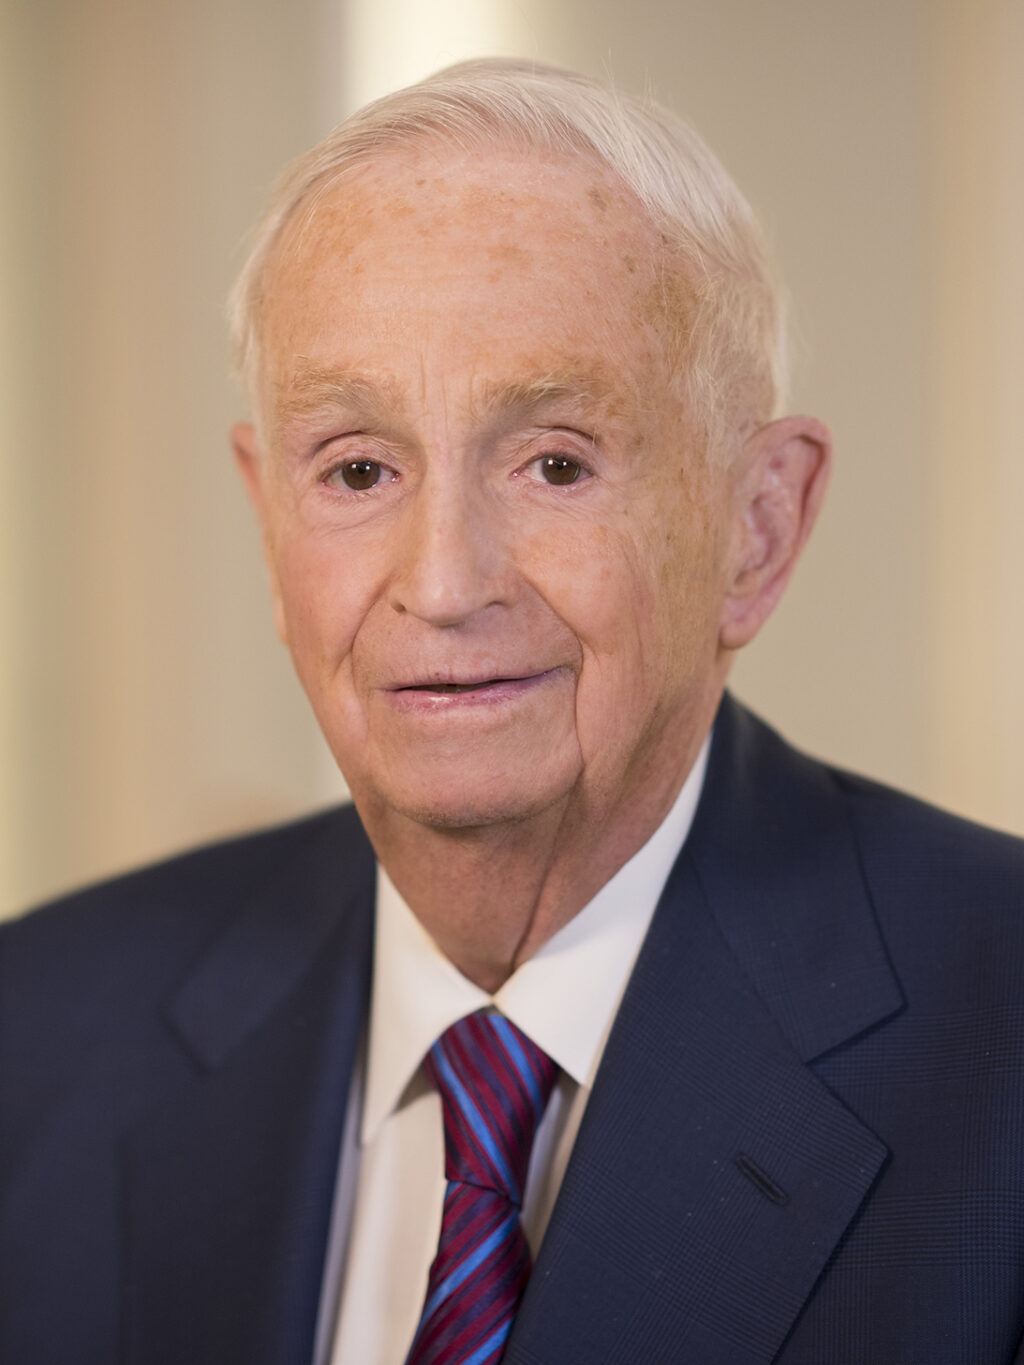 Bill Marriott To Step Down in May